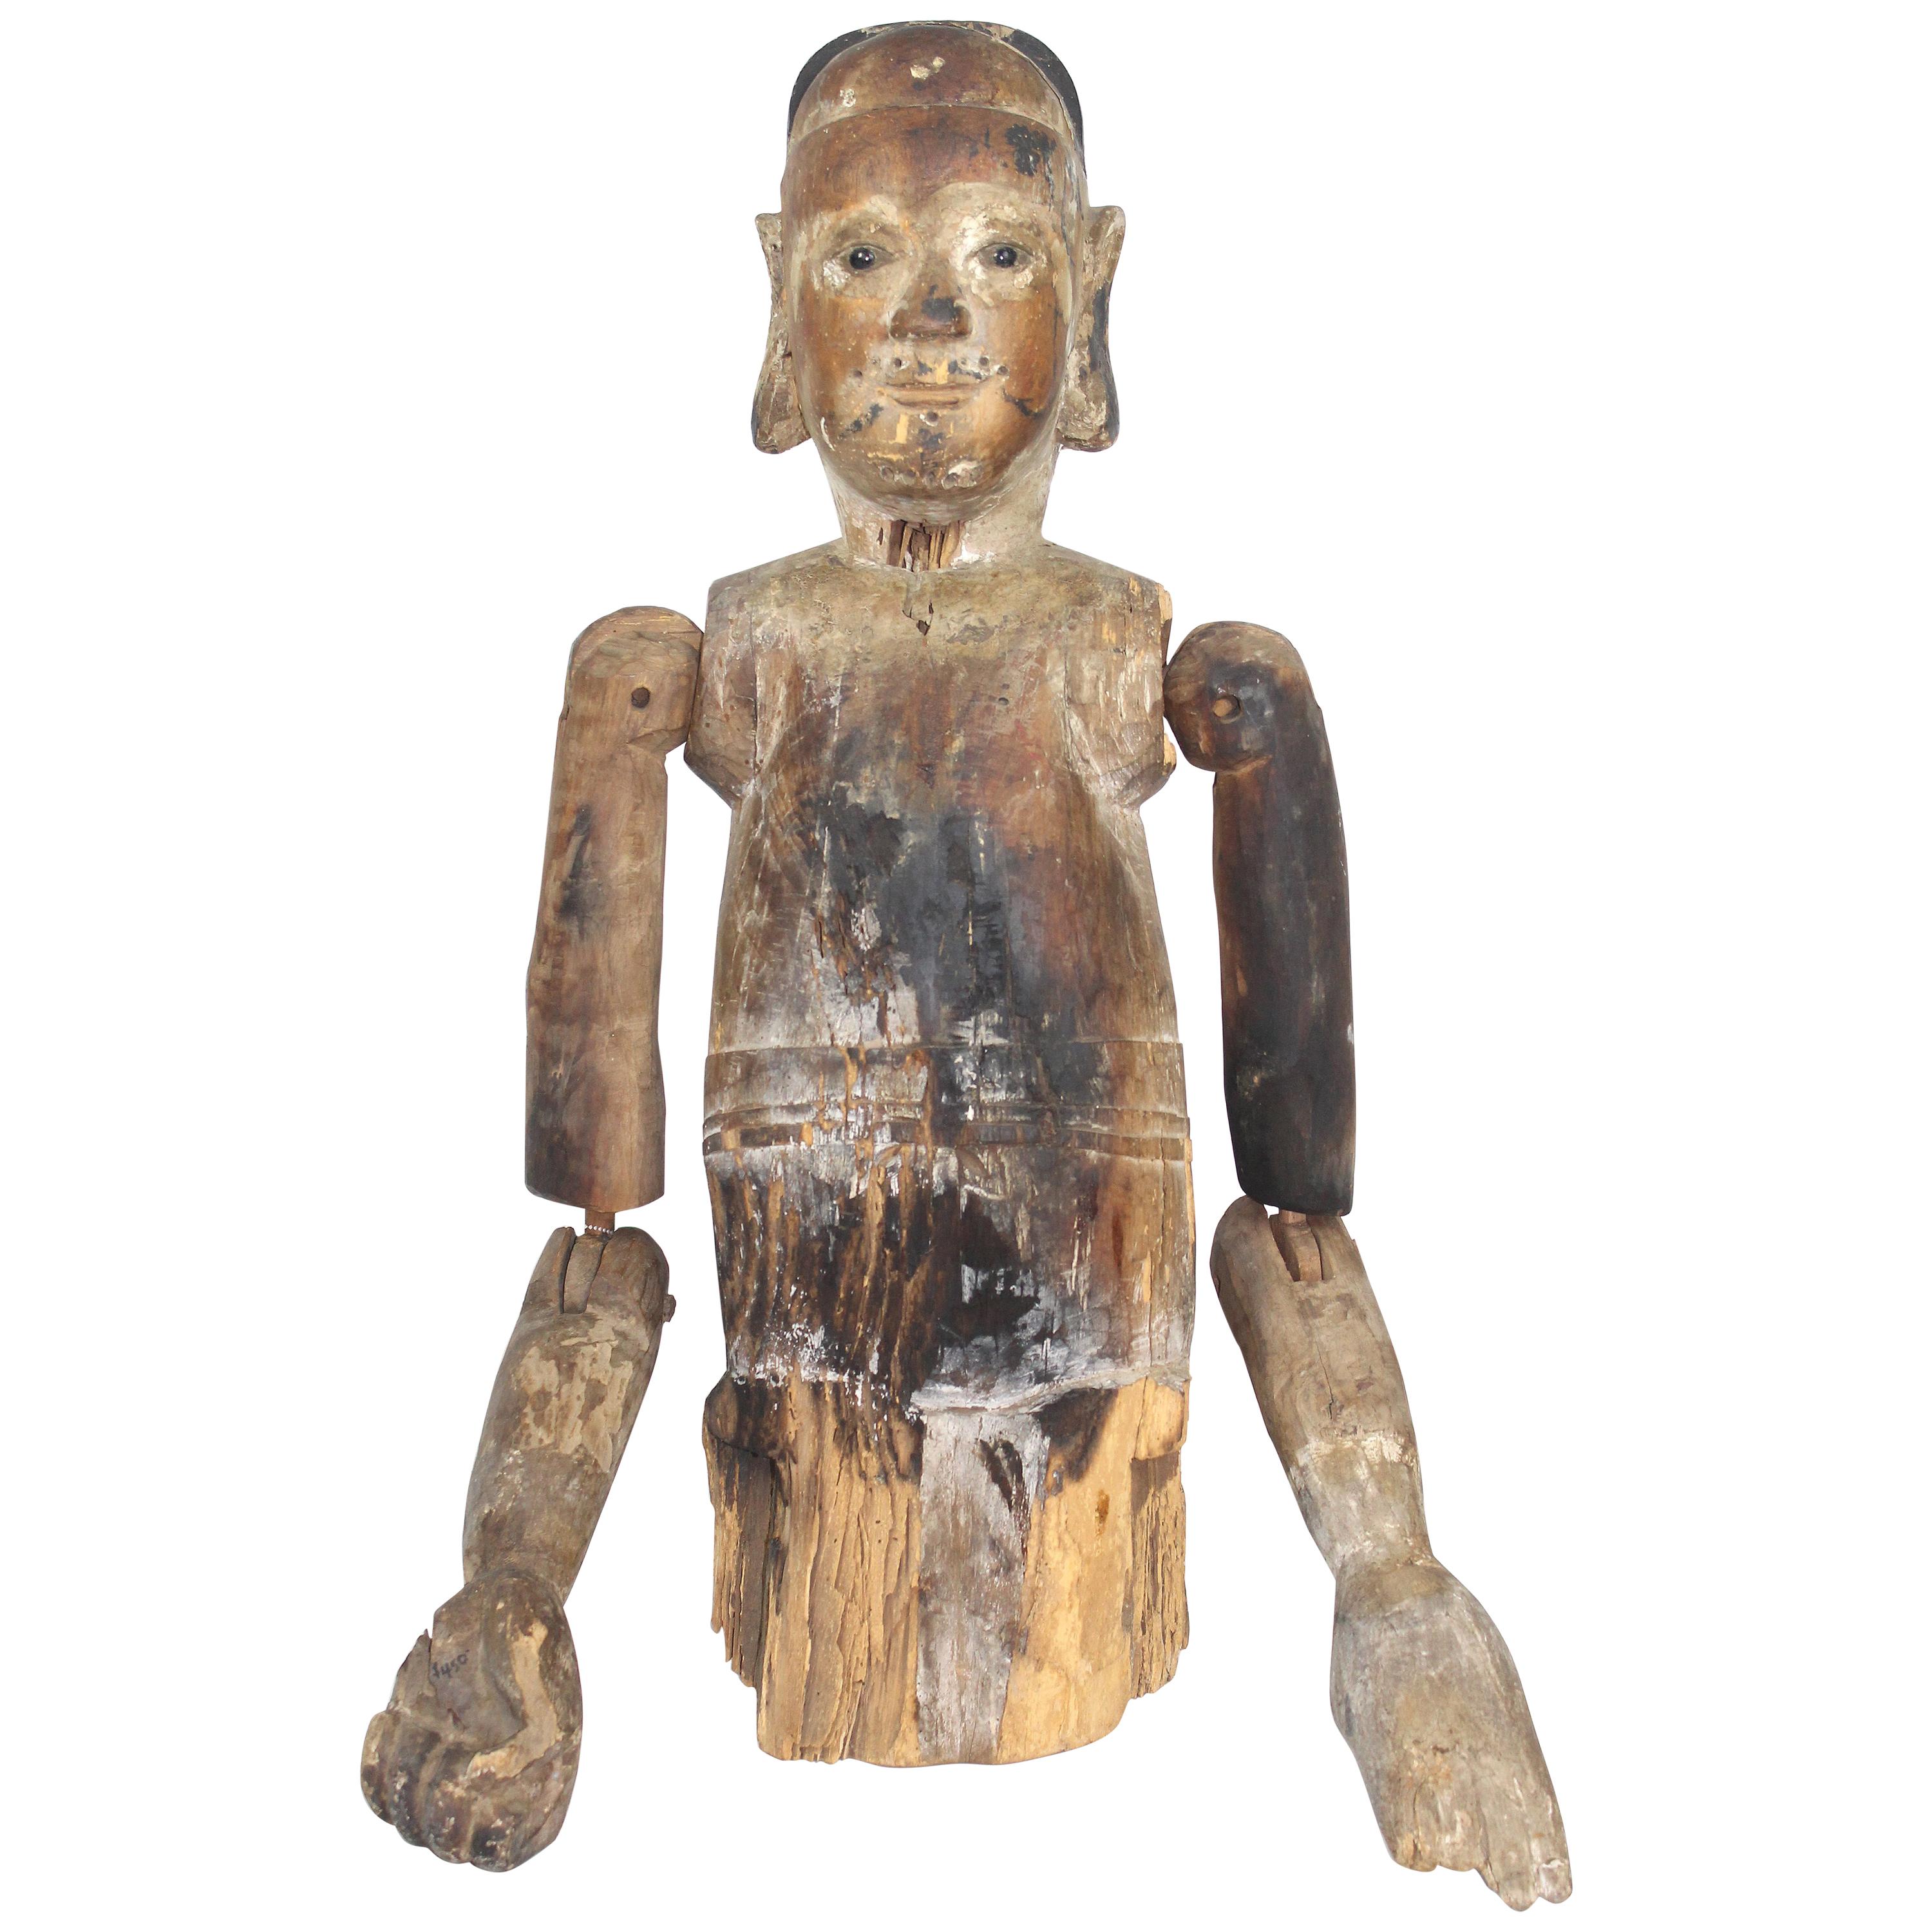 19th Century Antique Carved Wooden Figure Sculpture with Articulated Joints